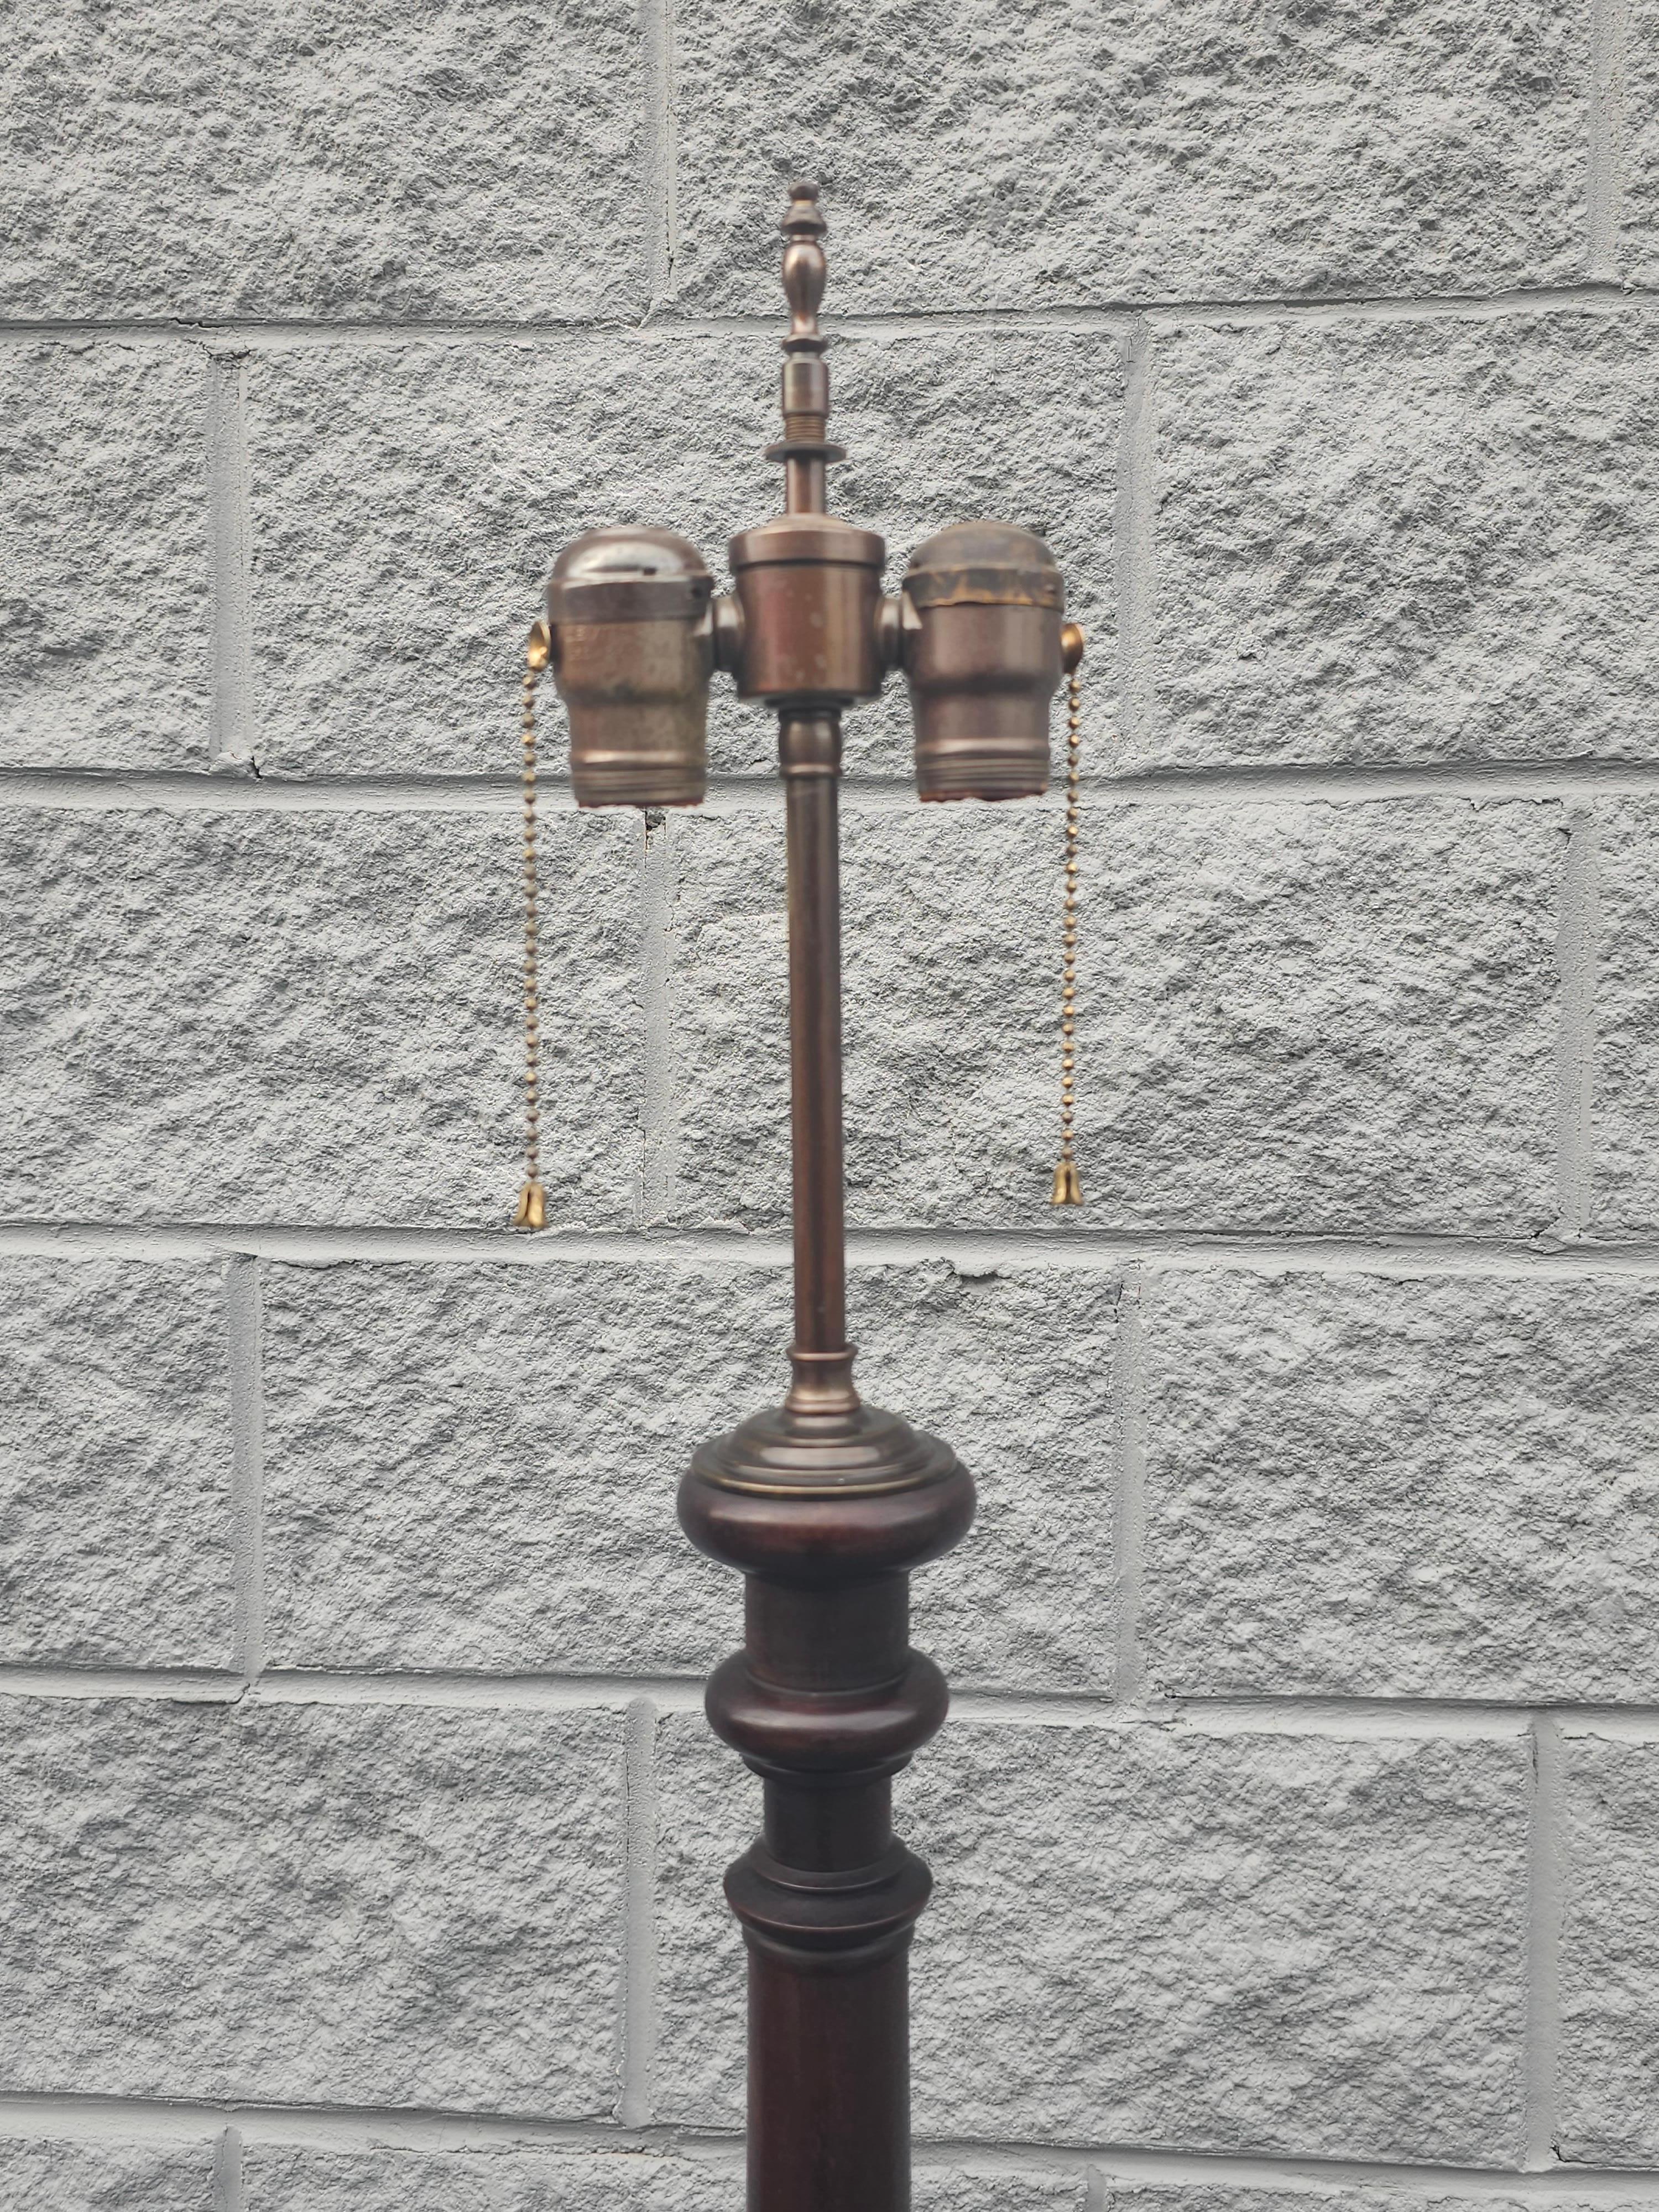 Mid-20th Century Mahogany and Brass Inset Dual Lights Floor Lamp In Good Condition For Sale In Germantown, MD